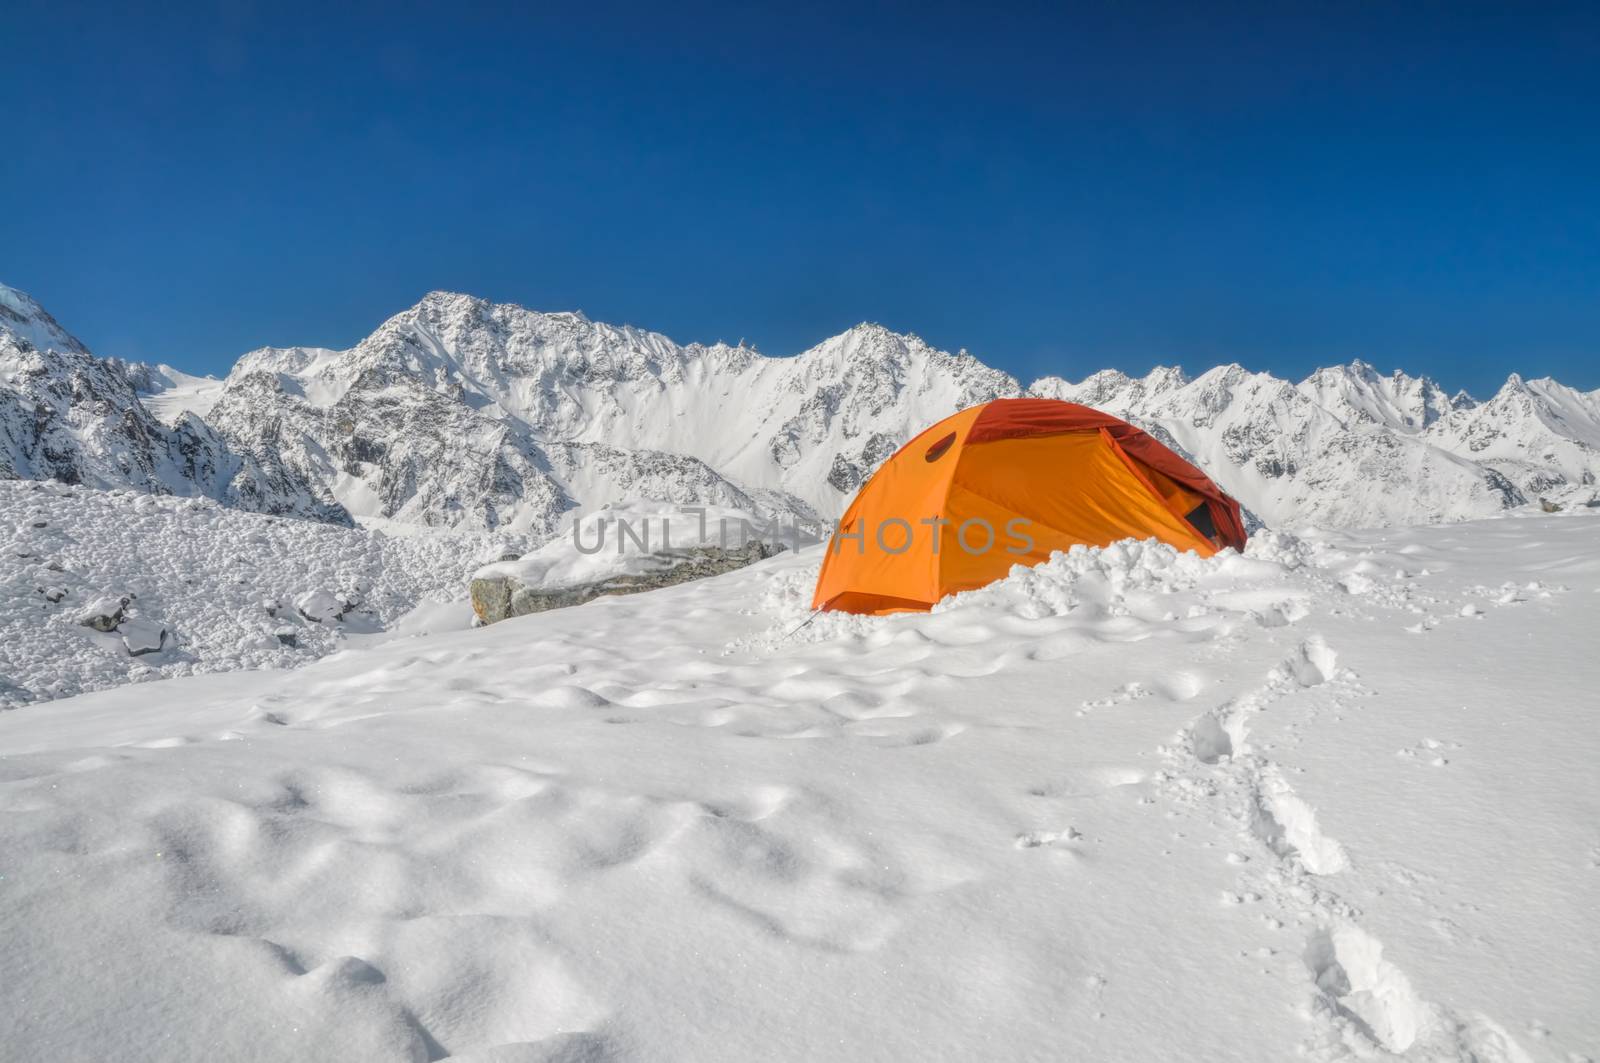 Camping in Himalayas near Kanchenjunga, the third tallest mountain in the world